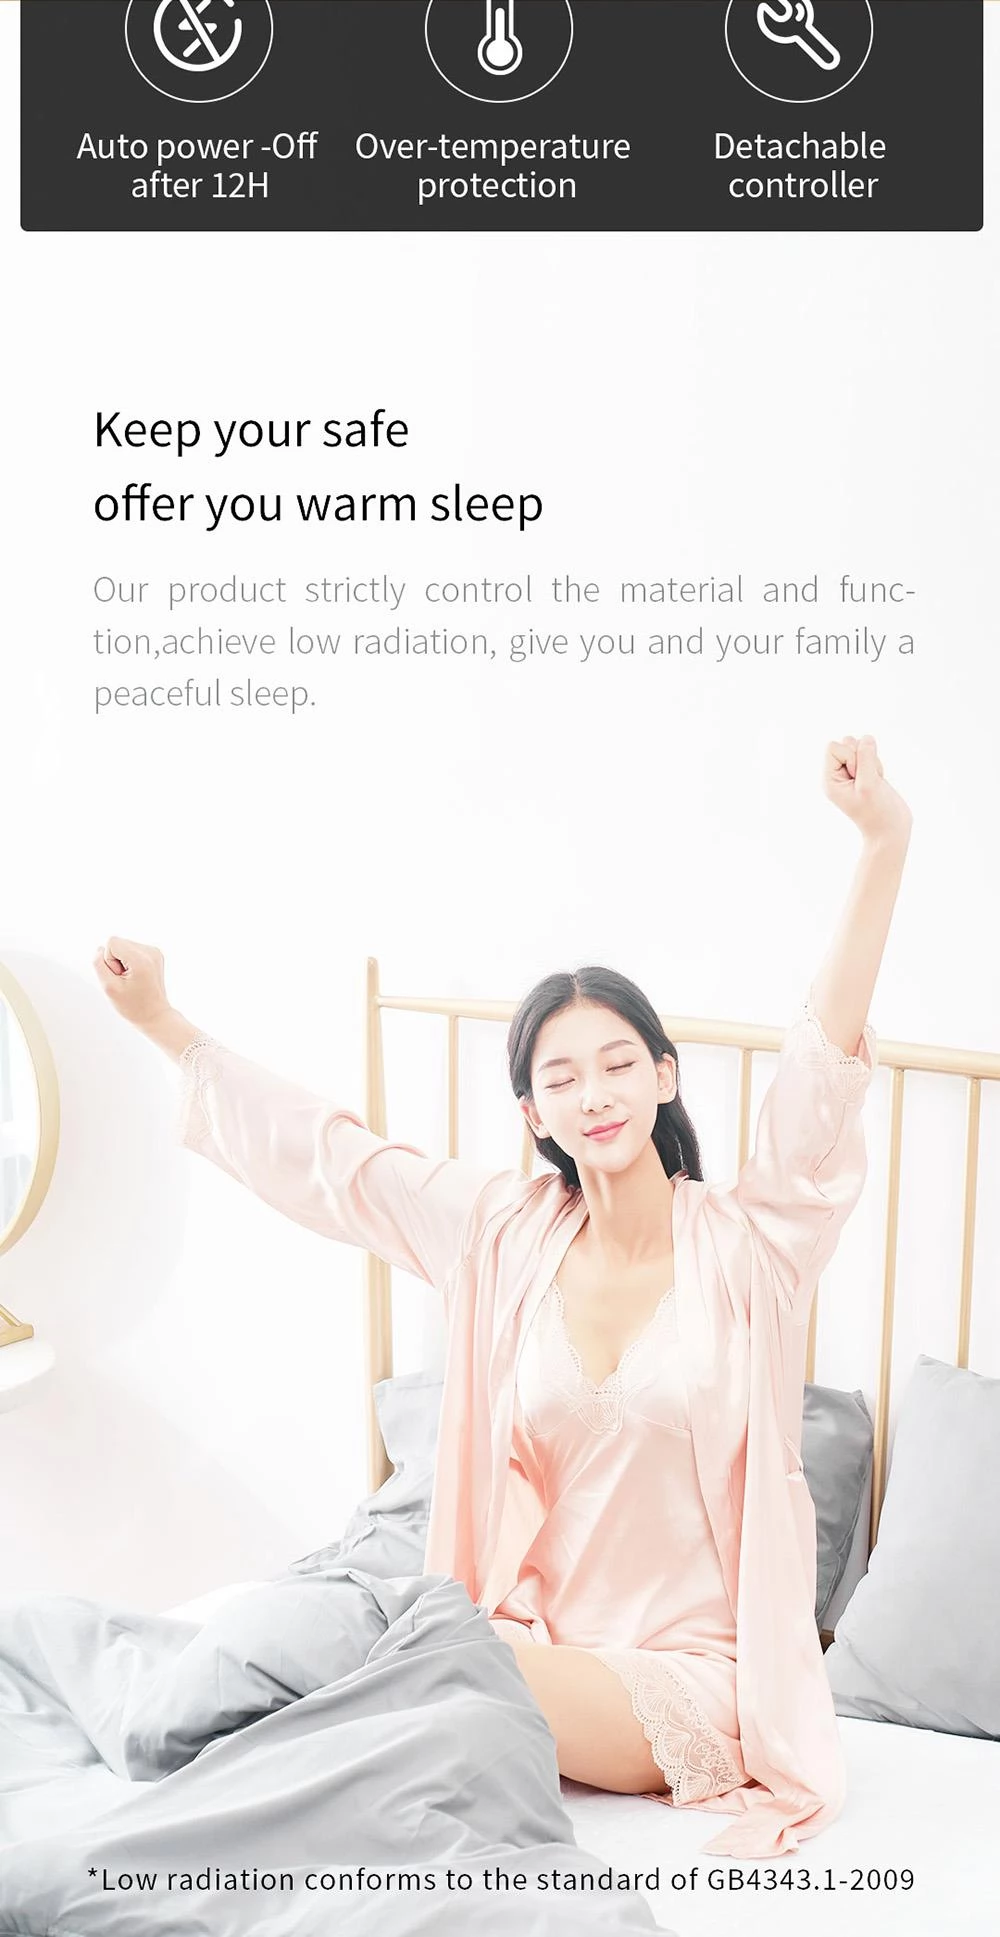 Xiaoda Electric Heating Blanket, Low Radiation, Overheat Protection, 12 Hours Automatic Power-off, 150*80cm